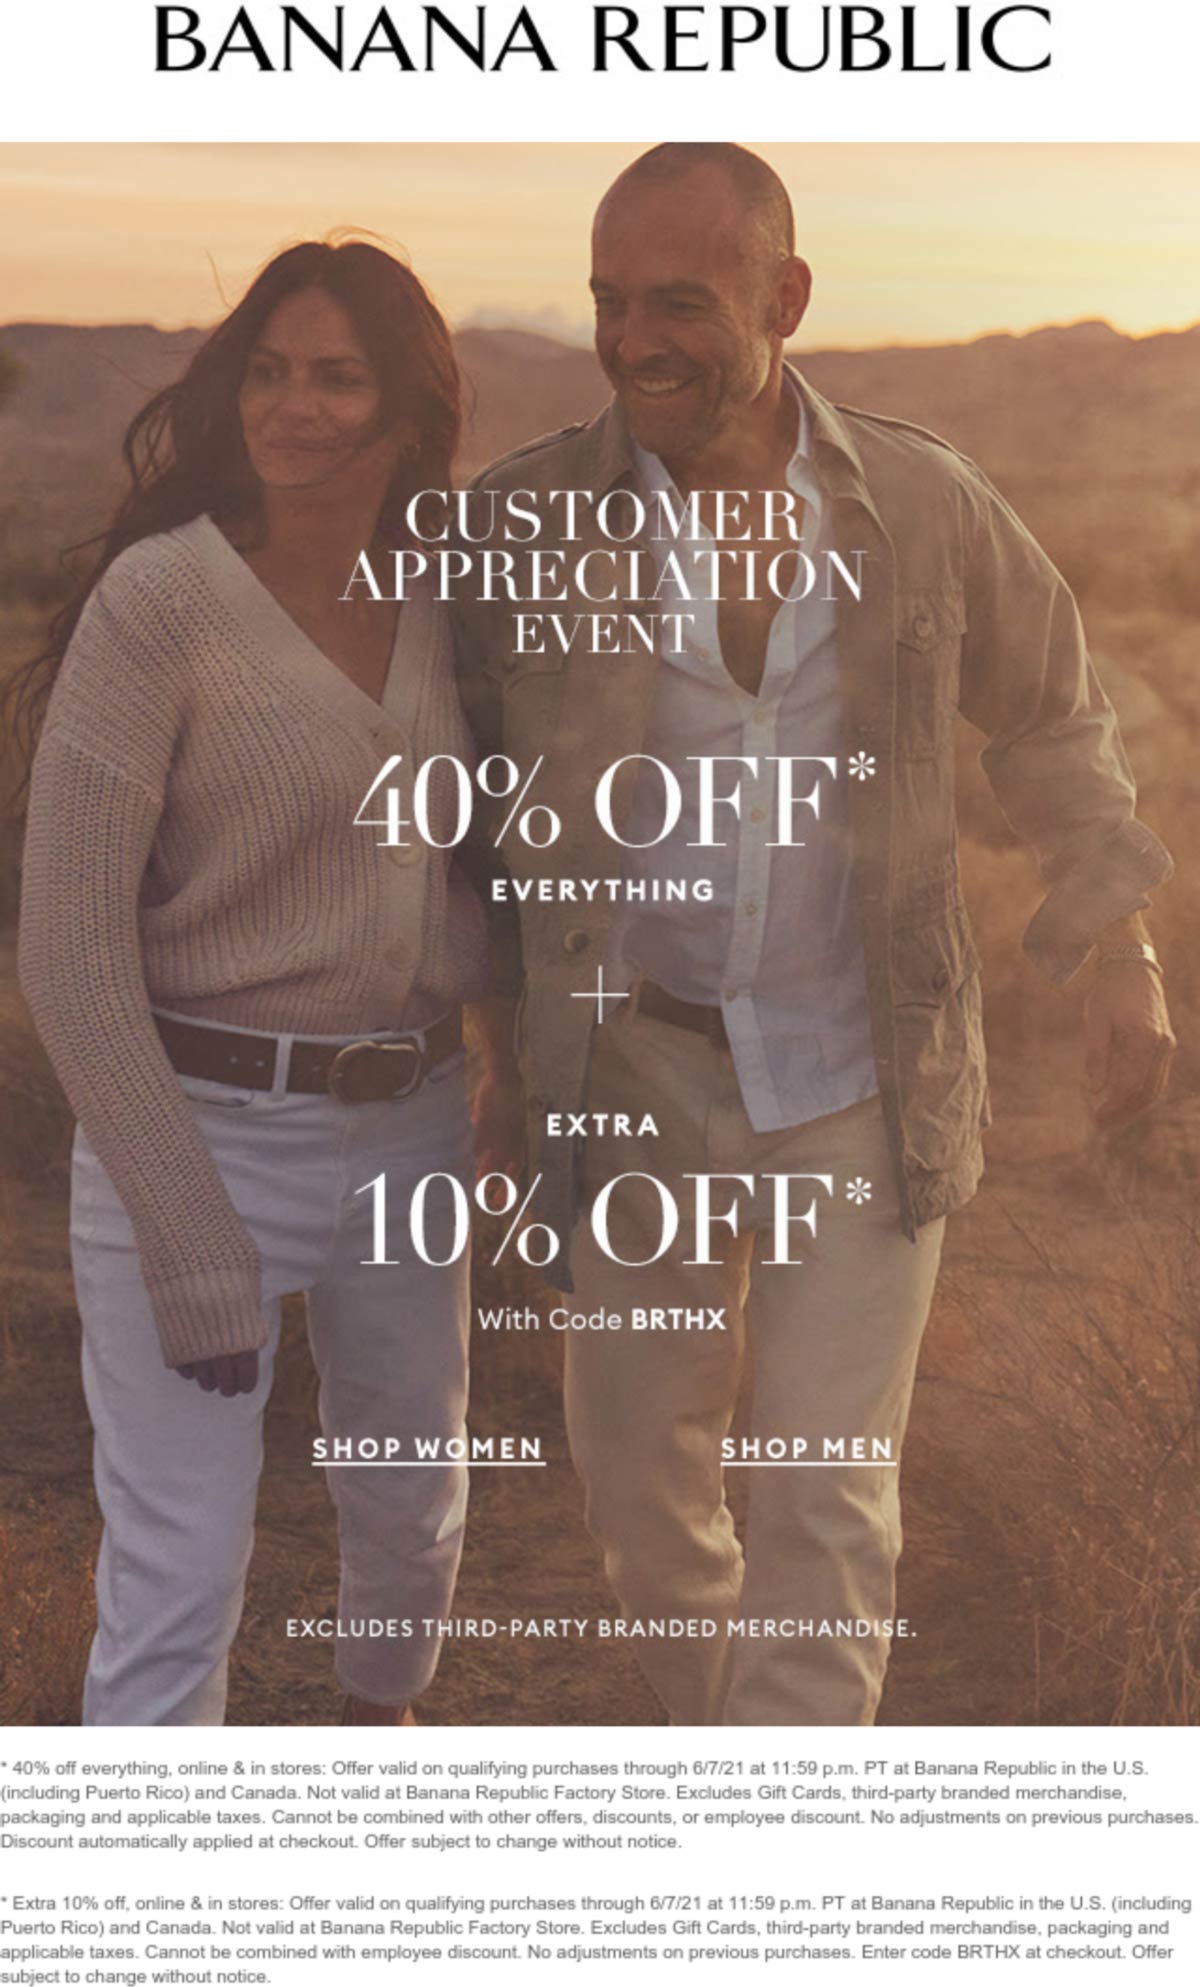 50% off everything at Banana Republic or online via promo code BRTHX #